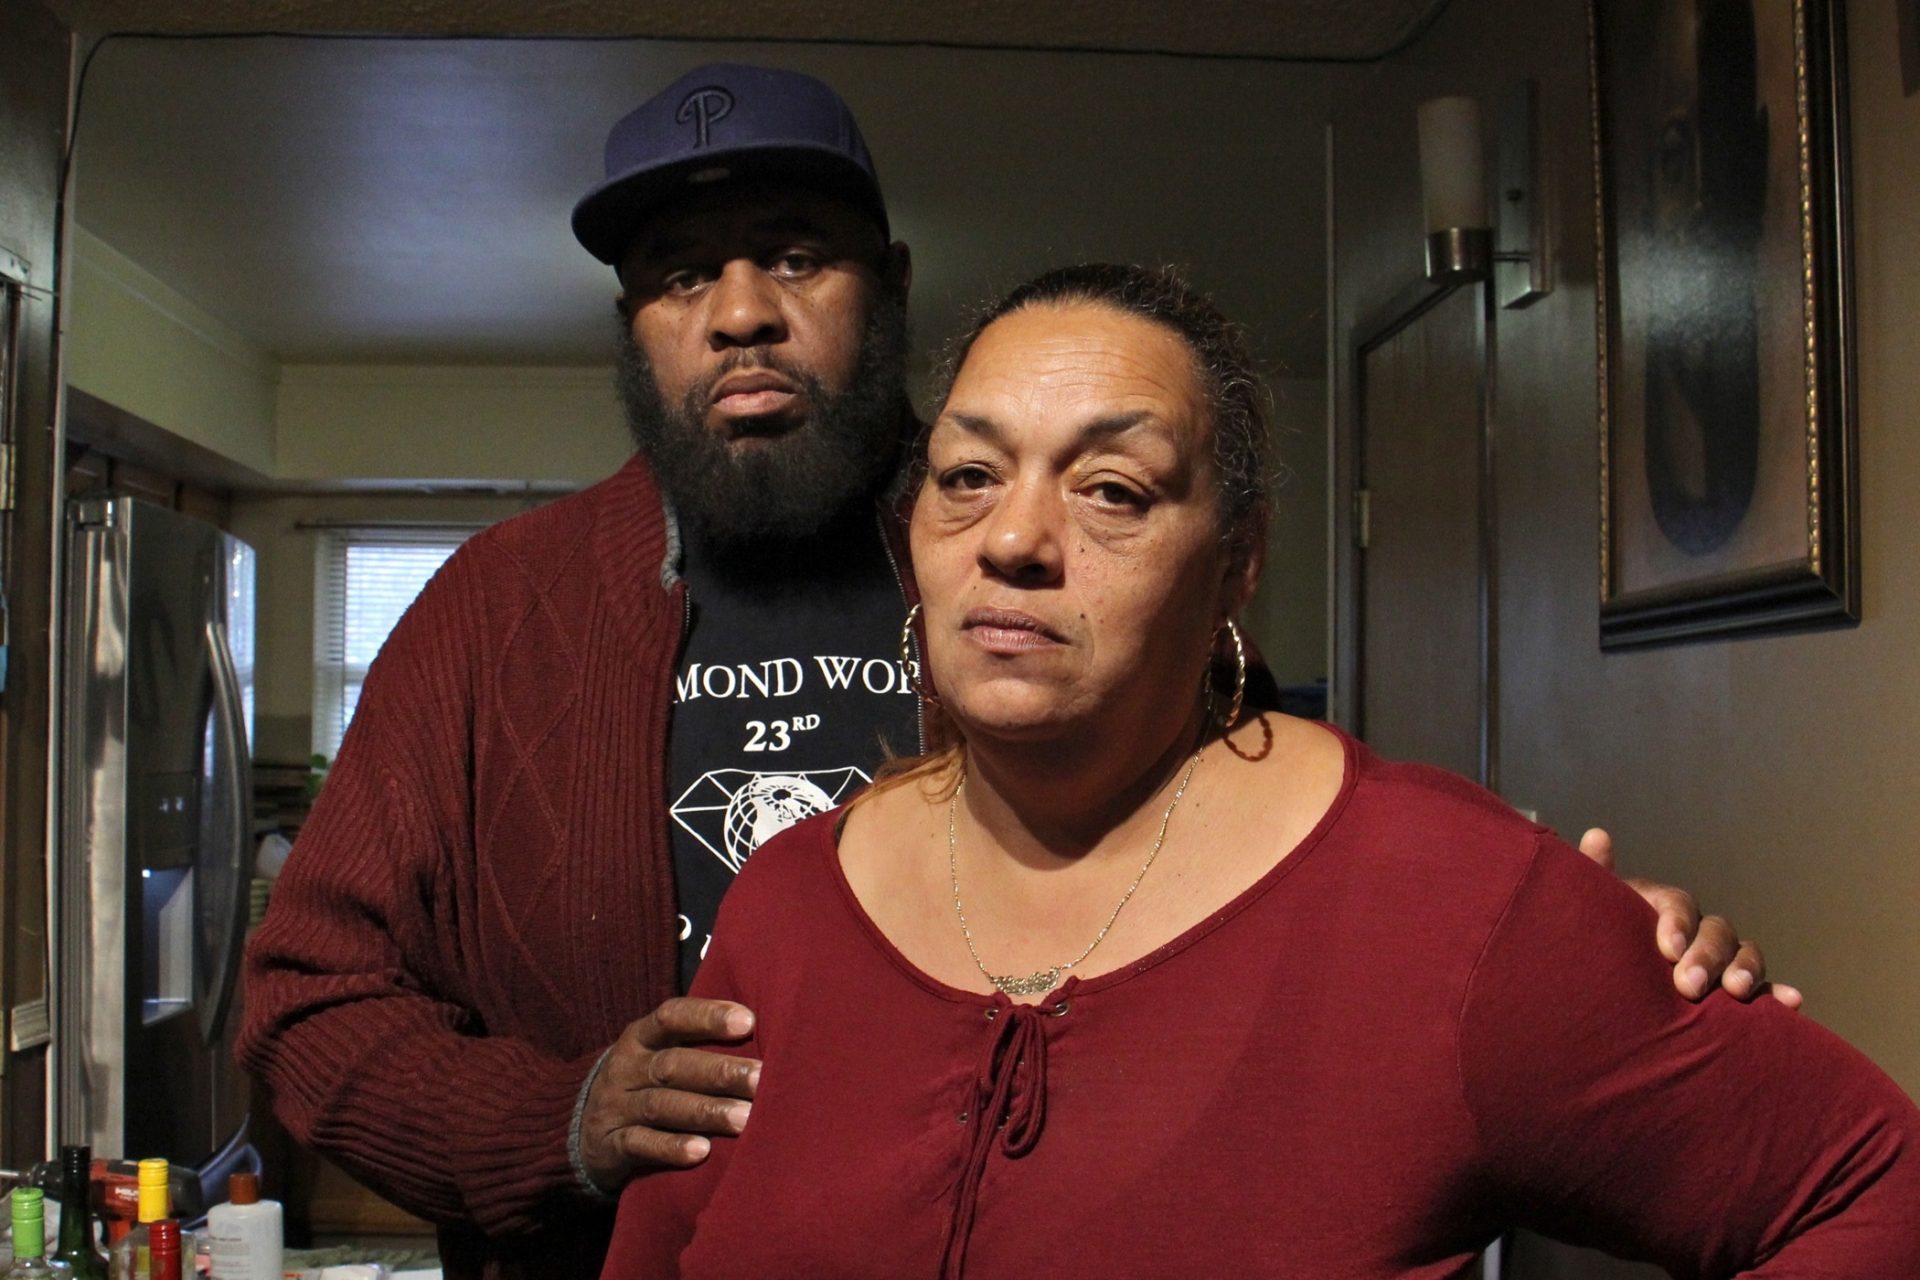 Alfonso and Gale Glenn were dismayed to learn that high lead levels were found in the drinking water at Frederick Douglass Mastery Charter School, where three of their children attend.